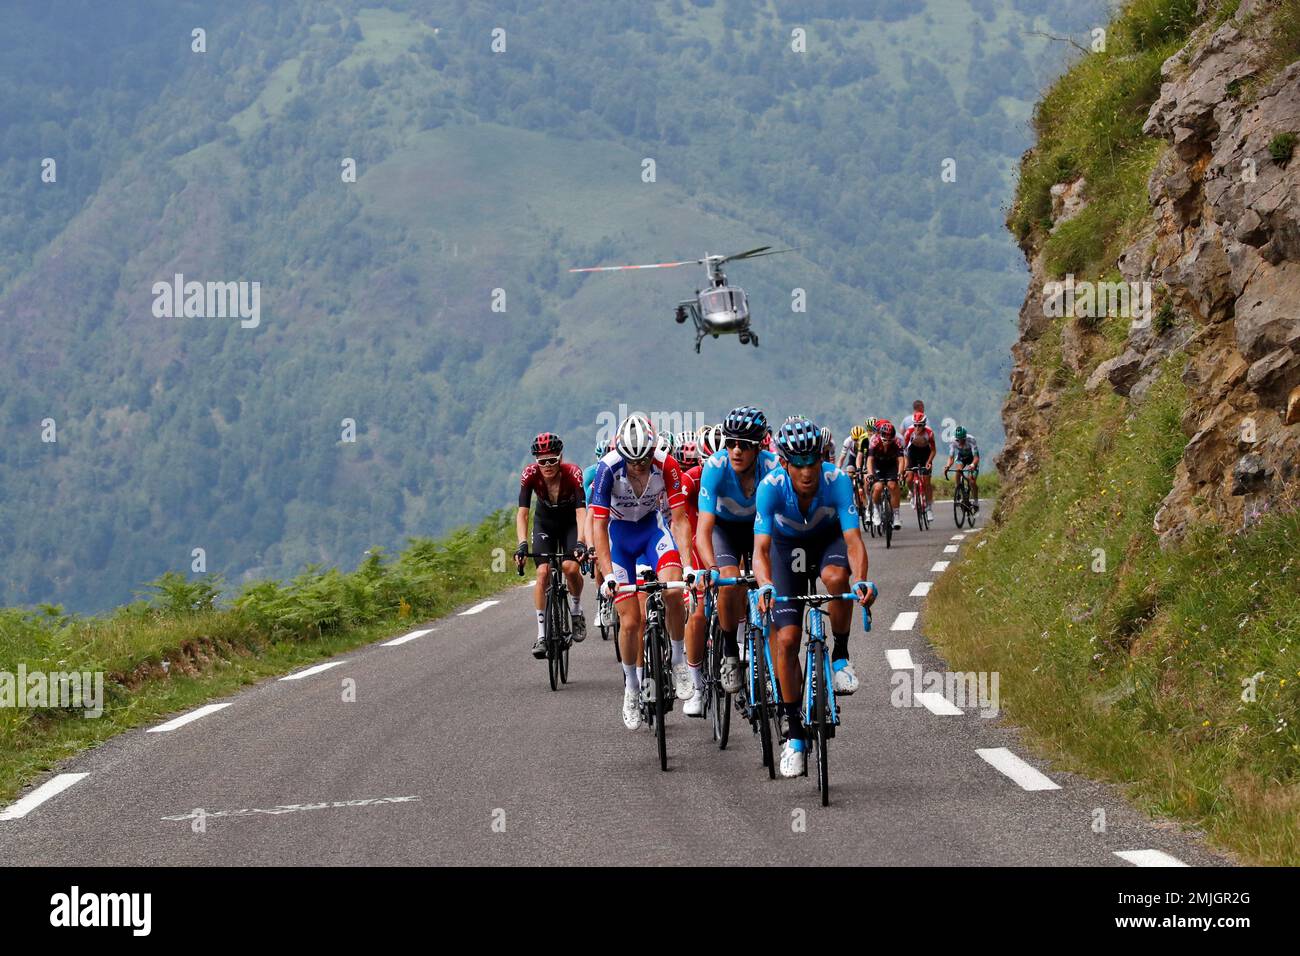 The helicopter with the live TV flies over the pack during the fourteenth stage of the Tour de France cycling race over 117,5 kilometers (73 miles) with start in Tarbes and finish